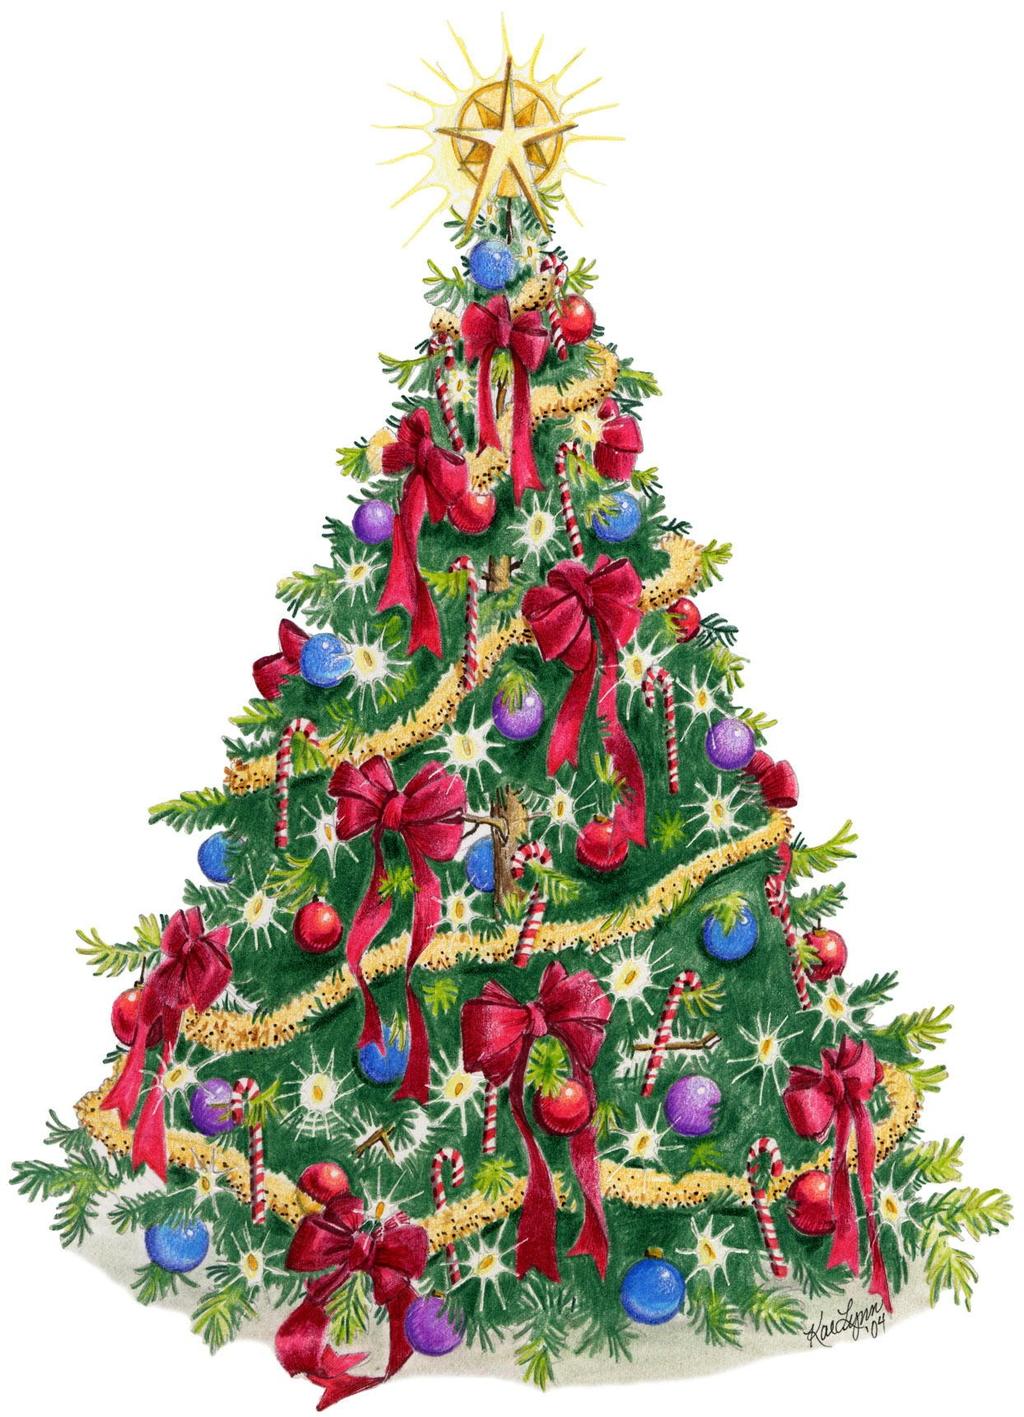 Origins of The Christmas Tree Most Christian traditions associated with evergreens and trees are related in some way to pre-christian practices.